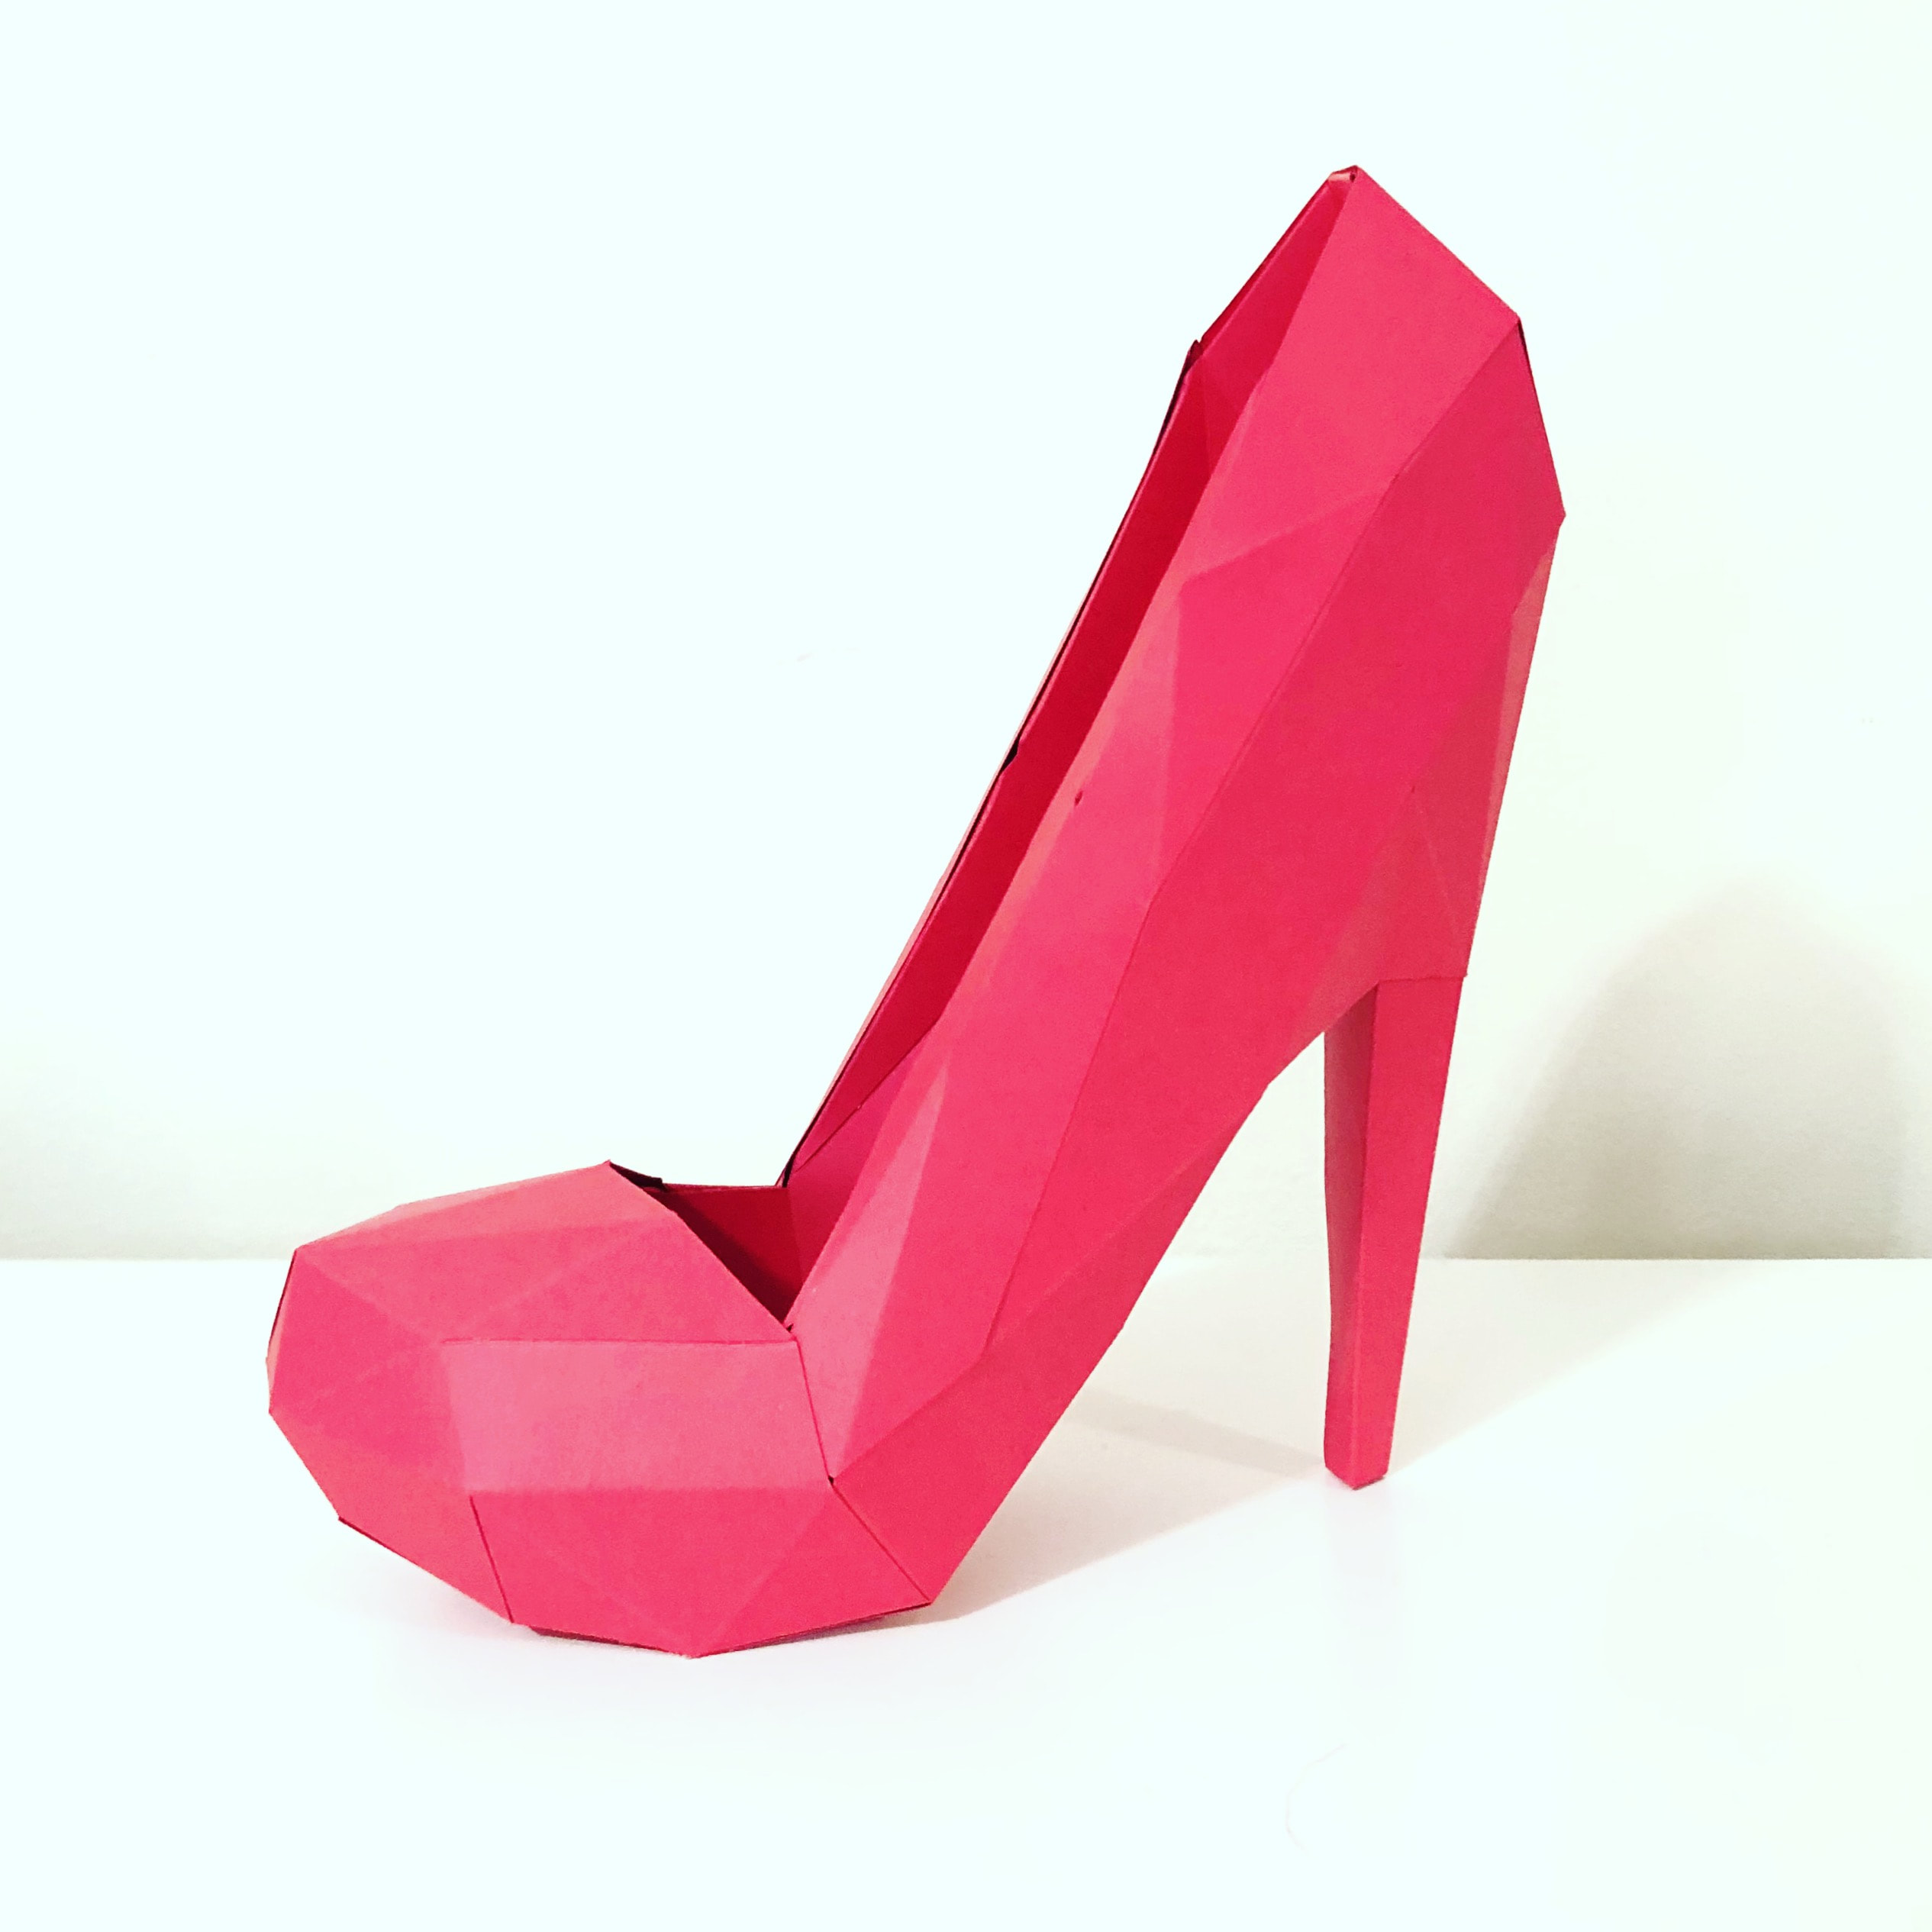 high-heel-shoe-template-for-card